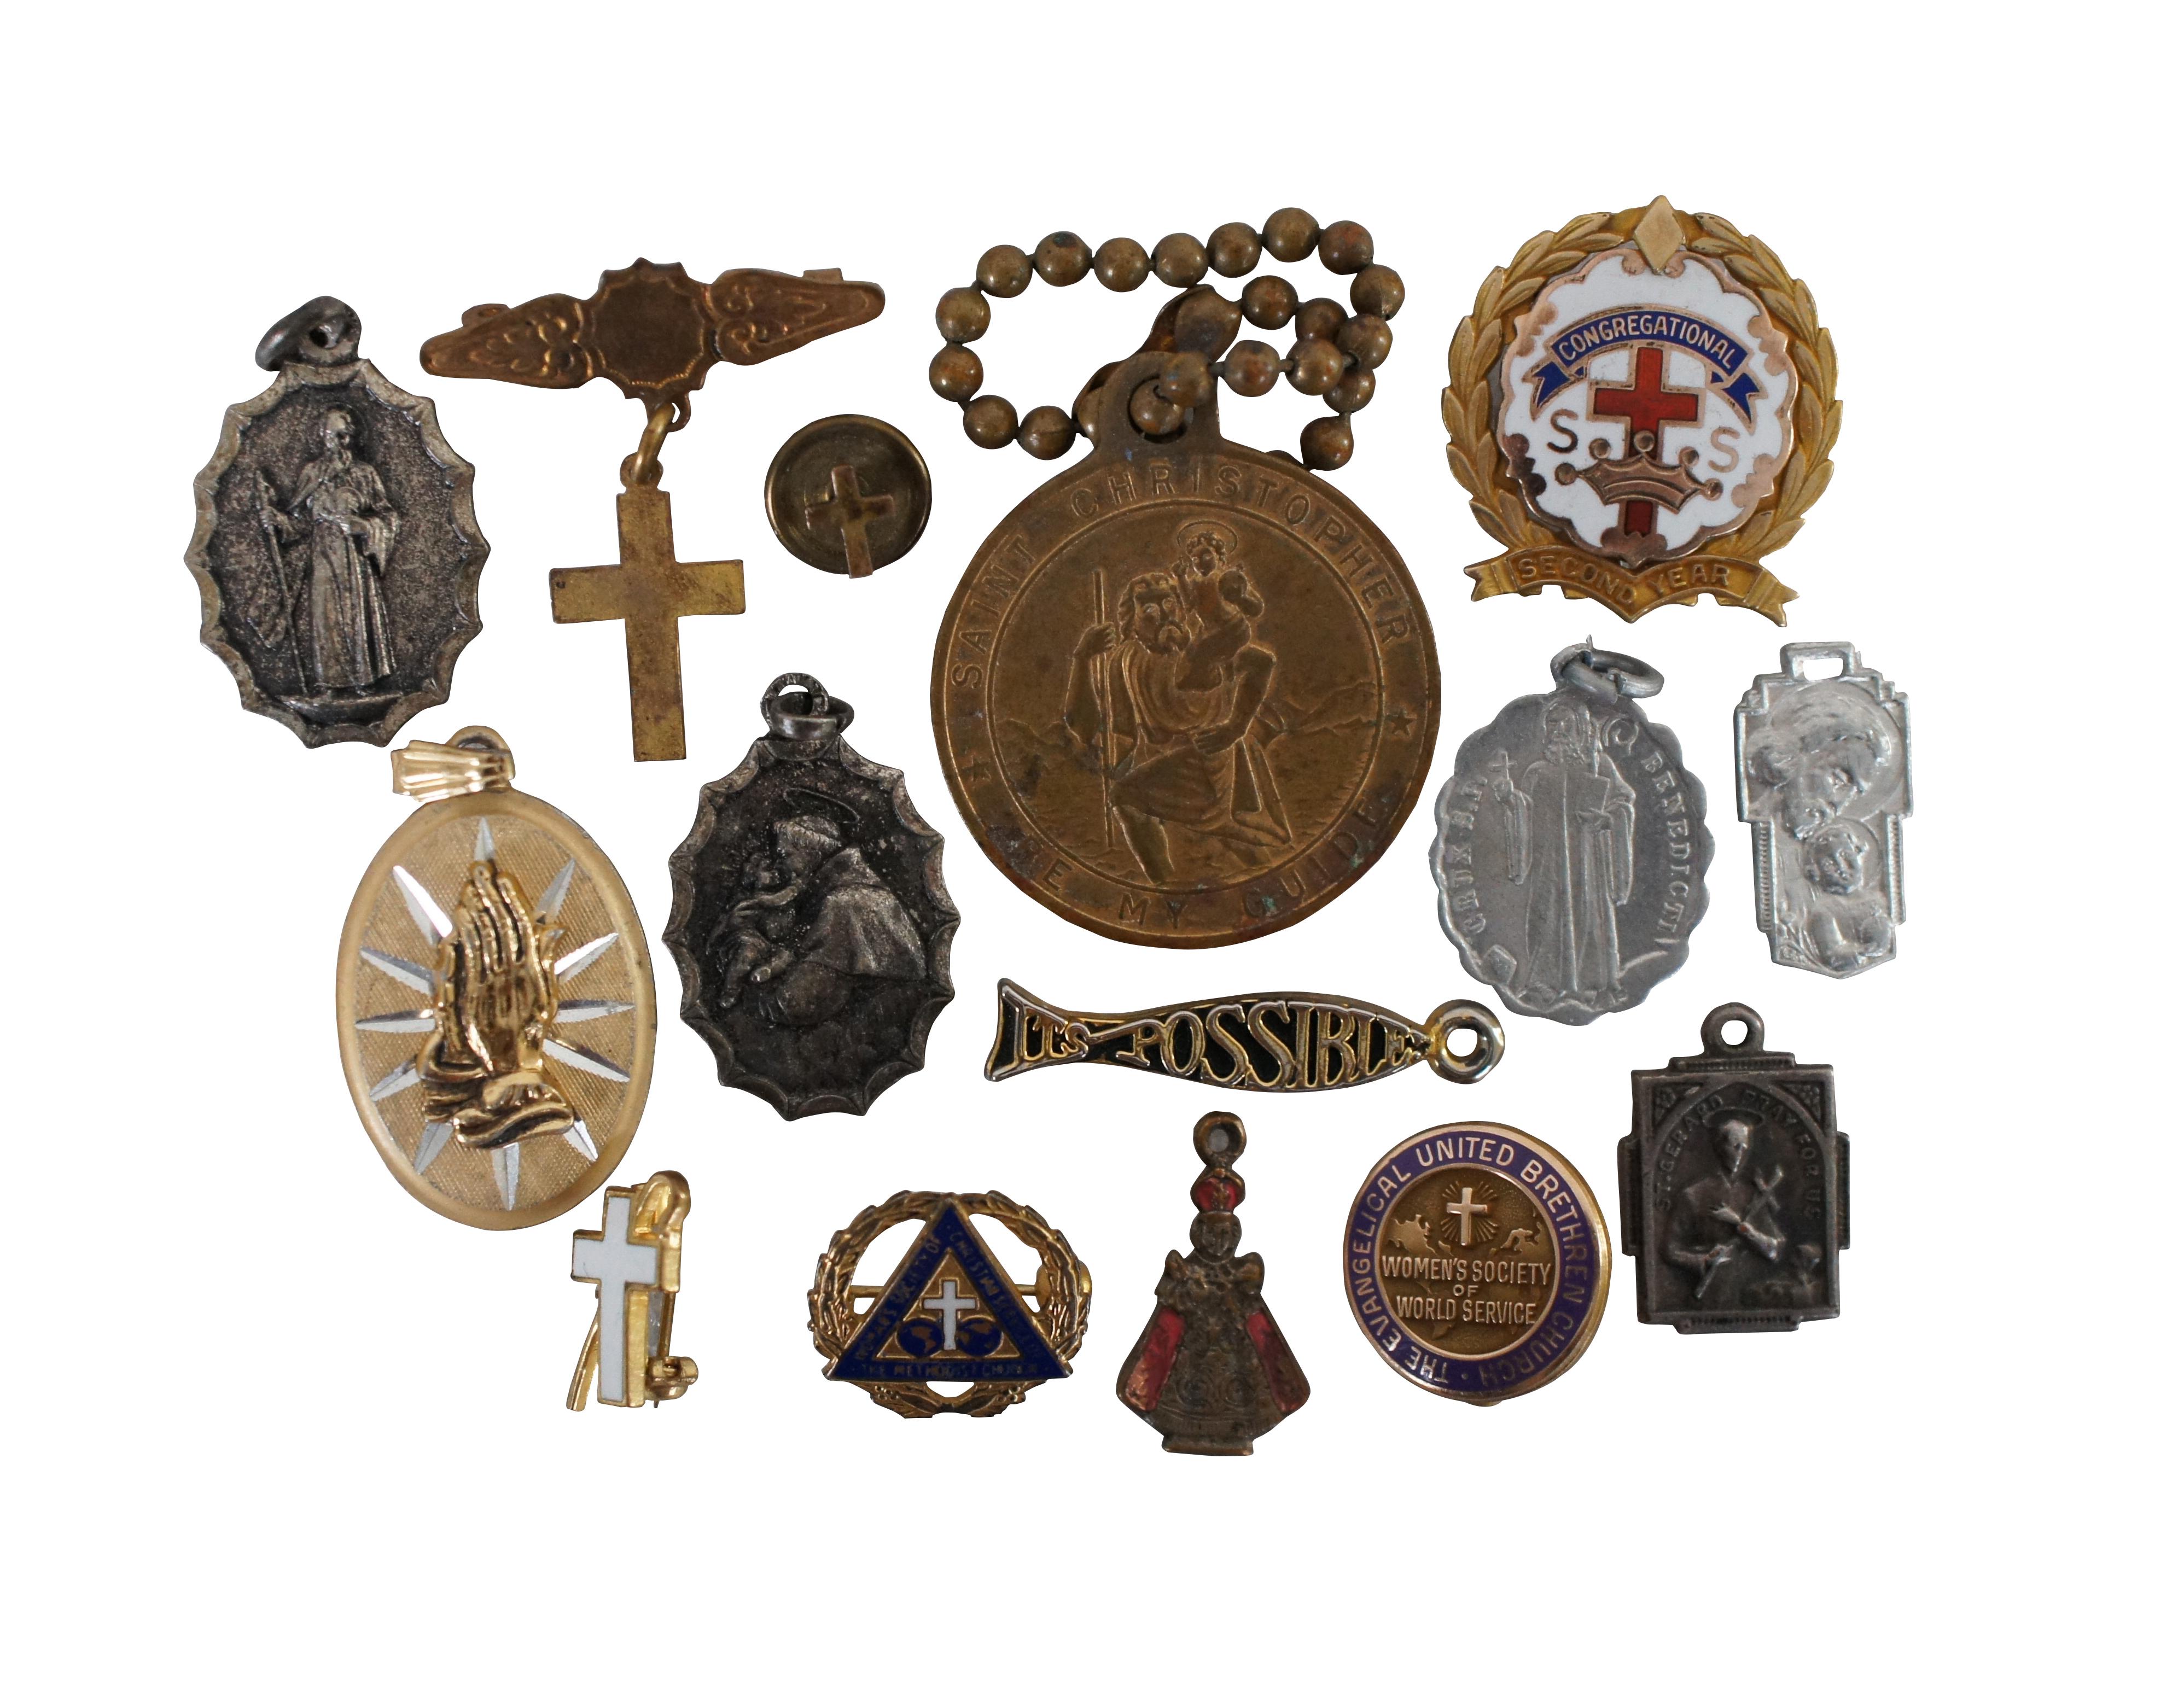 Assorted lot of 29 vintage and antique Christian / Catholic saint medals – including St Benedict, St Christopher, St Joseph, St Anthony, St Jude, The Infant of Prague, St Gerard, and several manifestations of the Virgin Mary / Miraculous Medals -